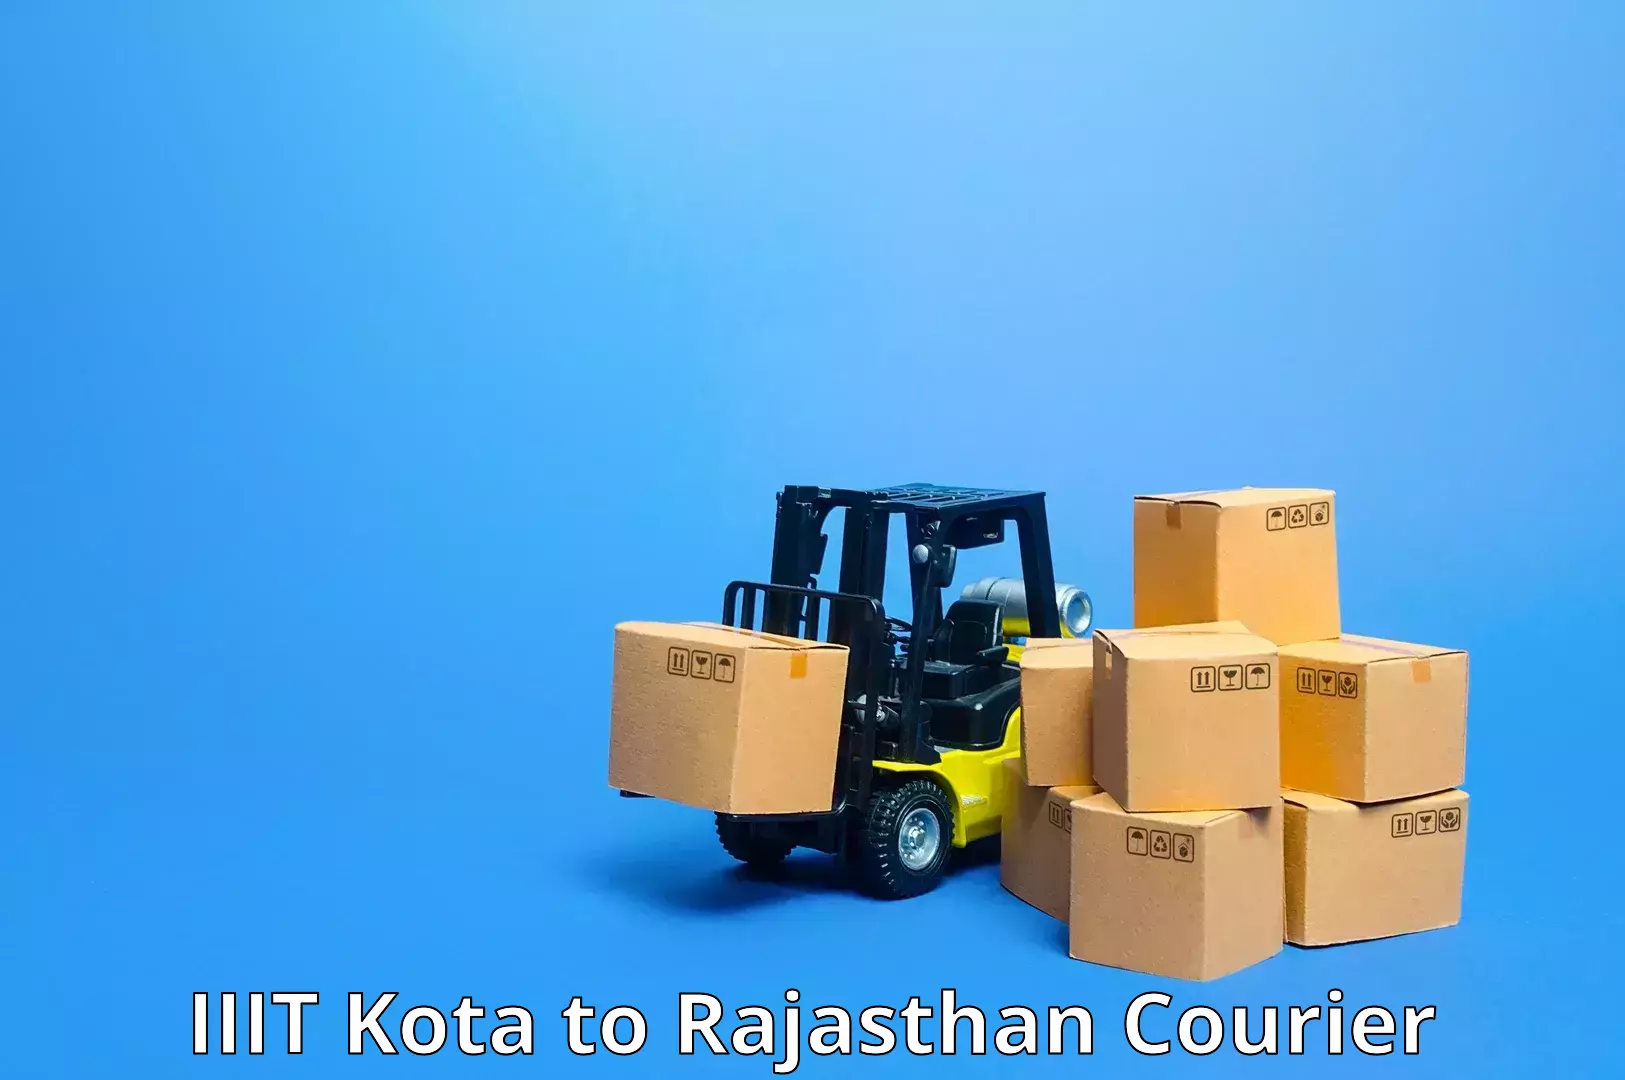 Next-day delivery options IIIT Kota to Ramgarh Sikar